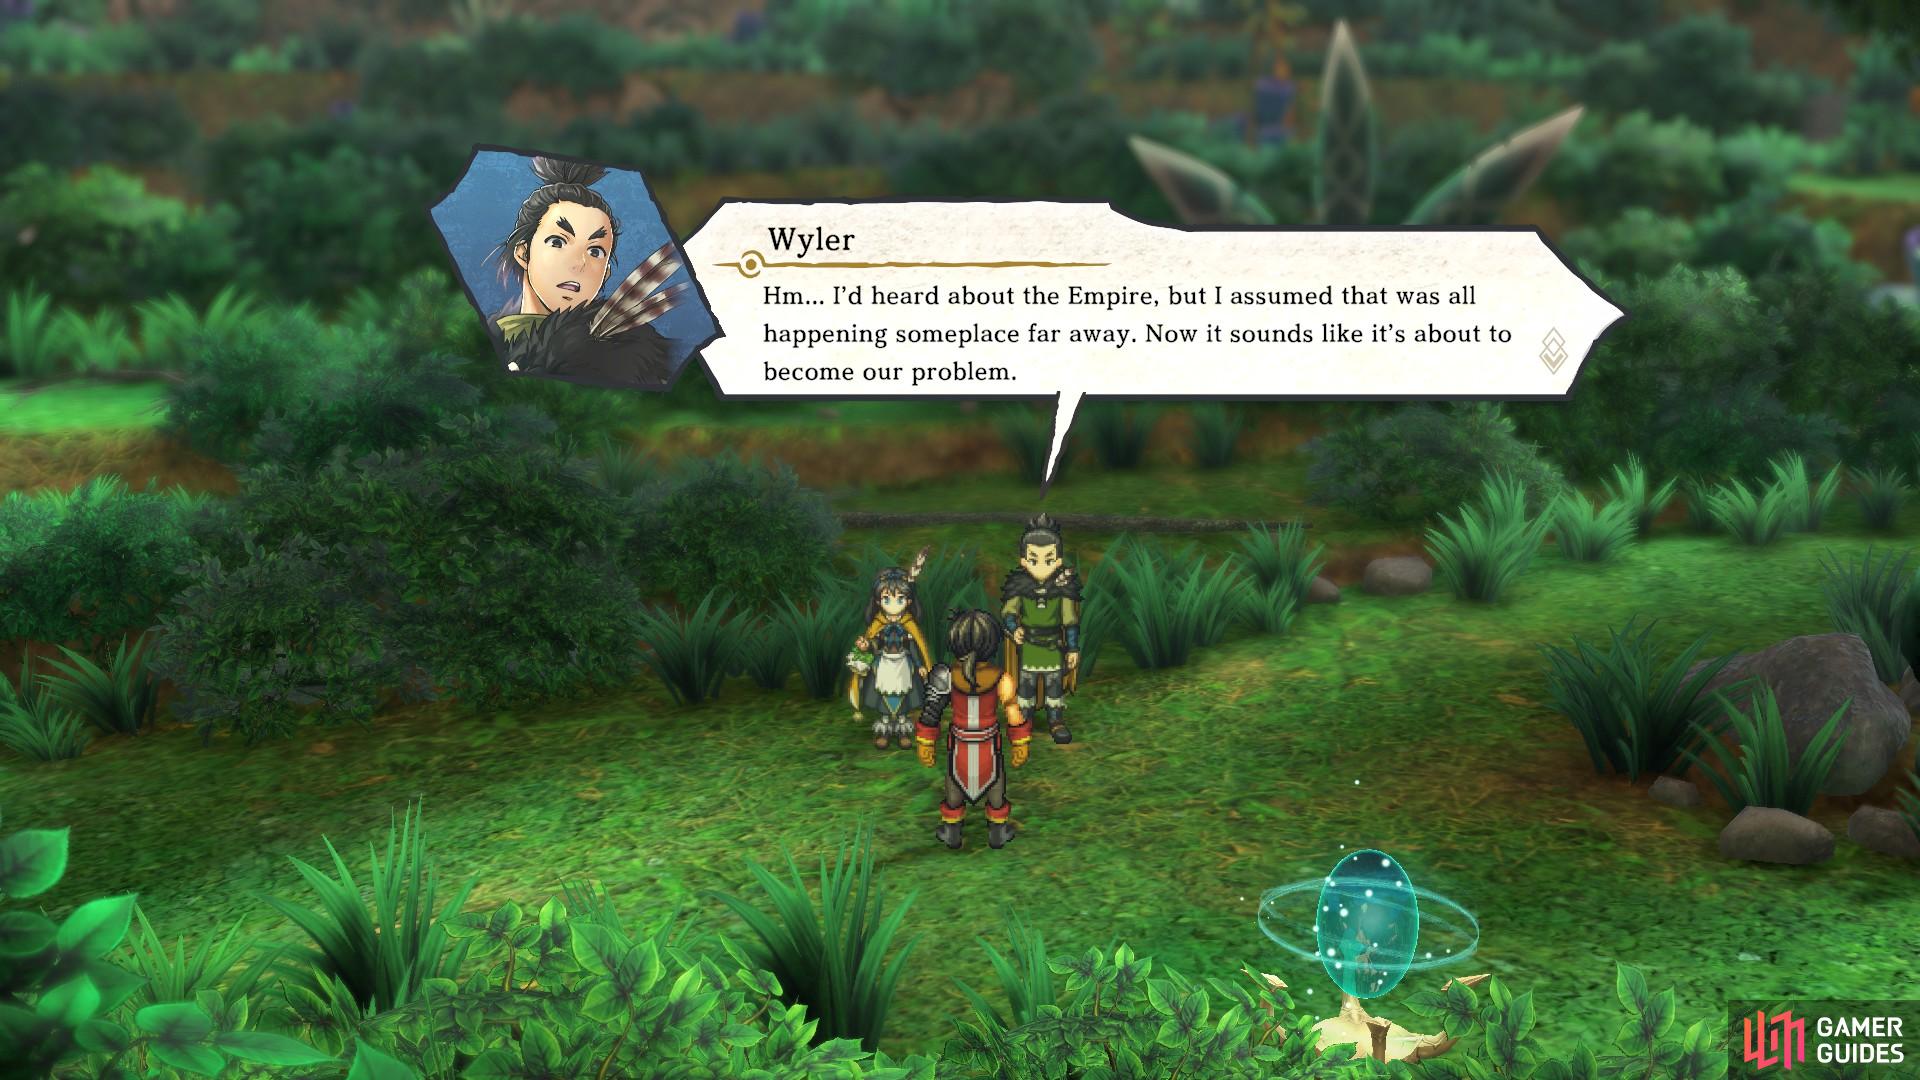 Wyler and Marin will join your party at the same time.